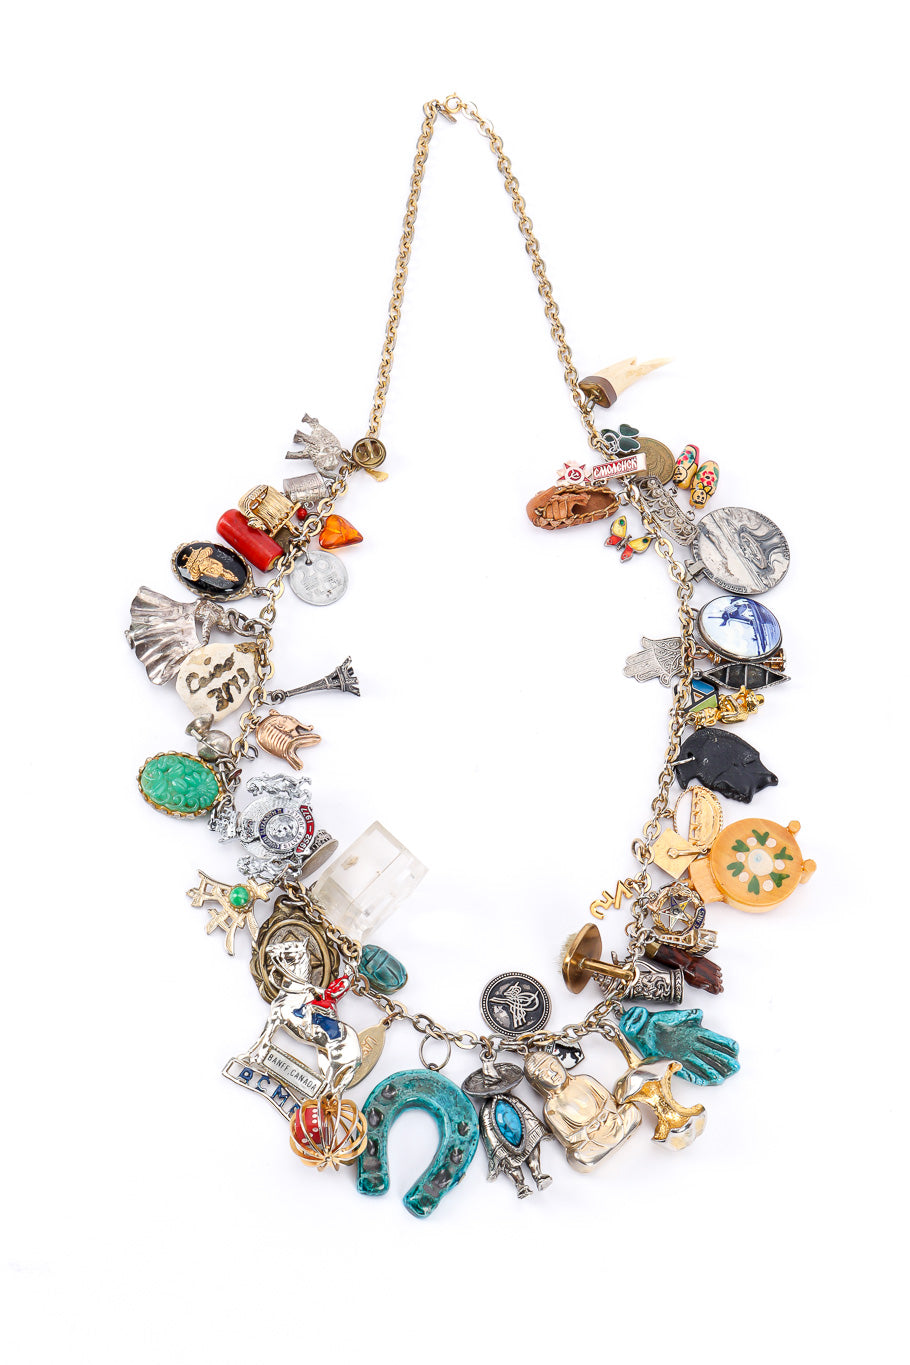 Charm necklace by Monet on white background @recessla